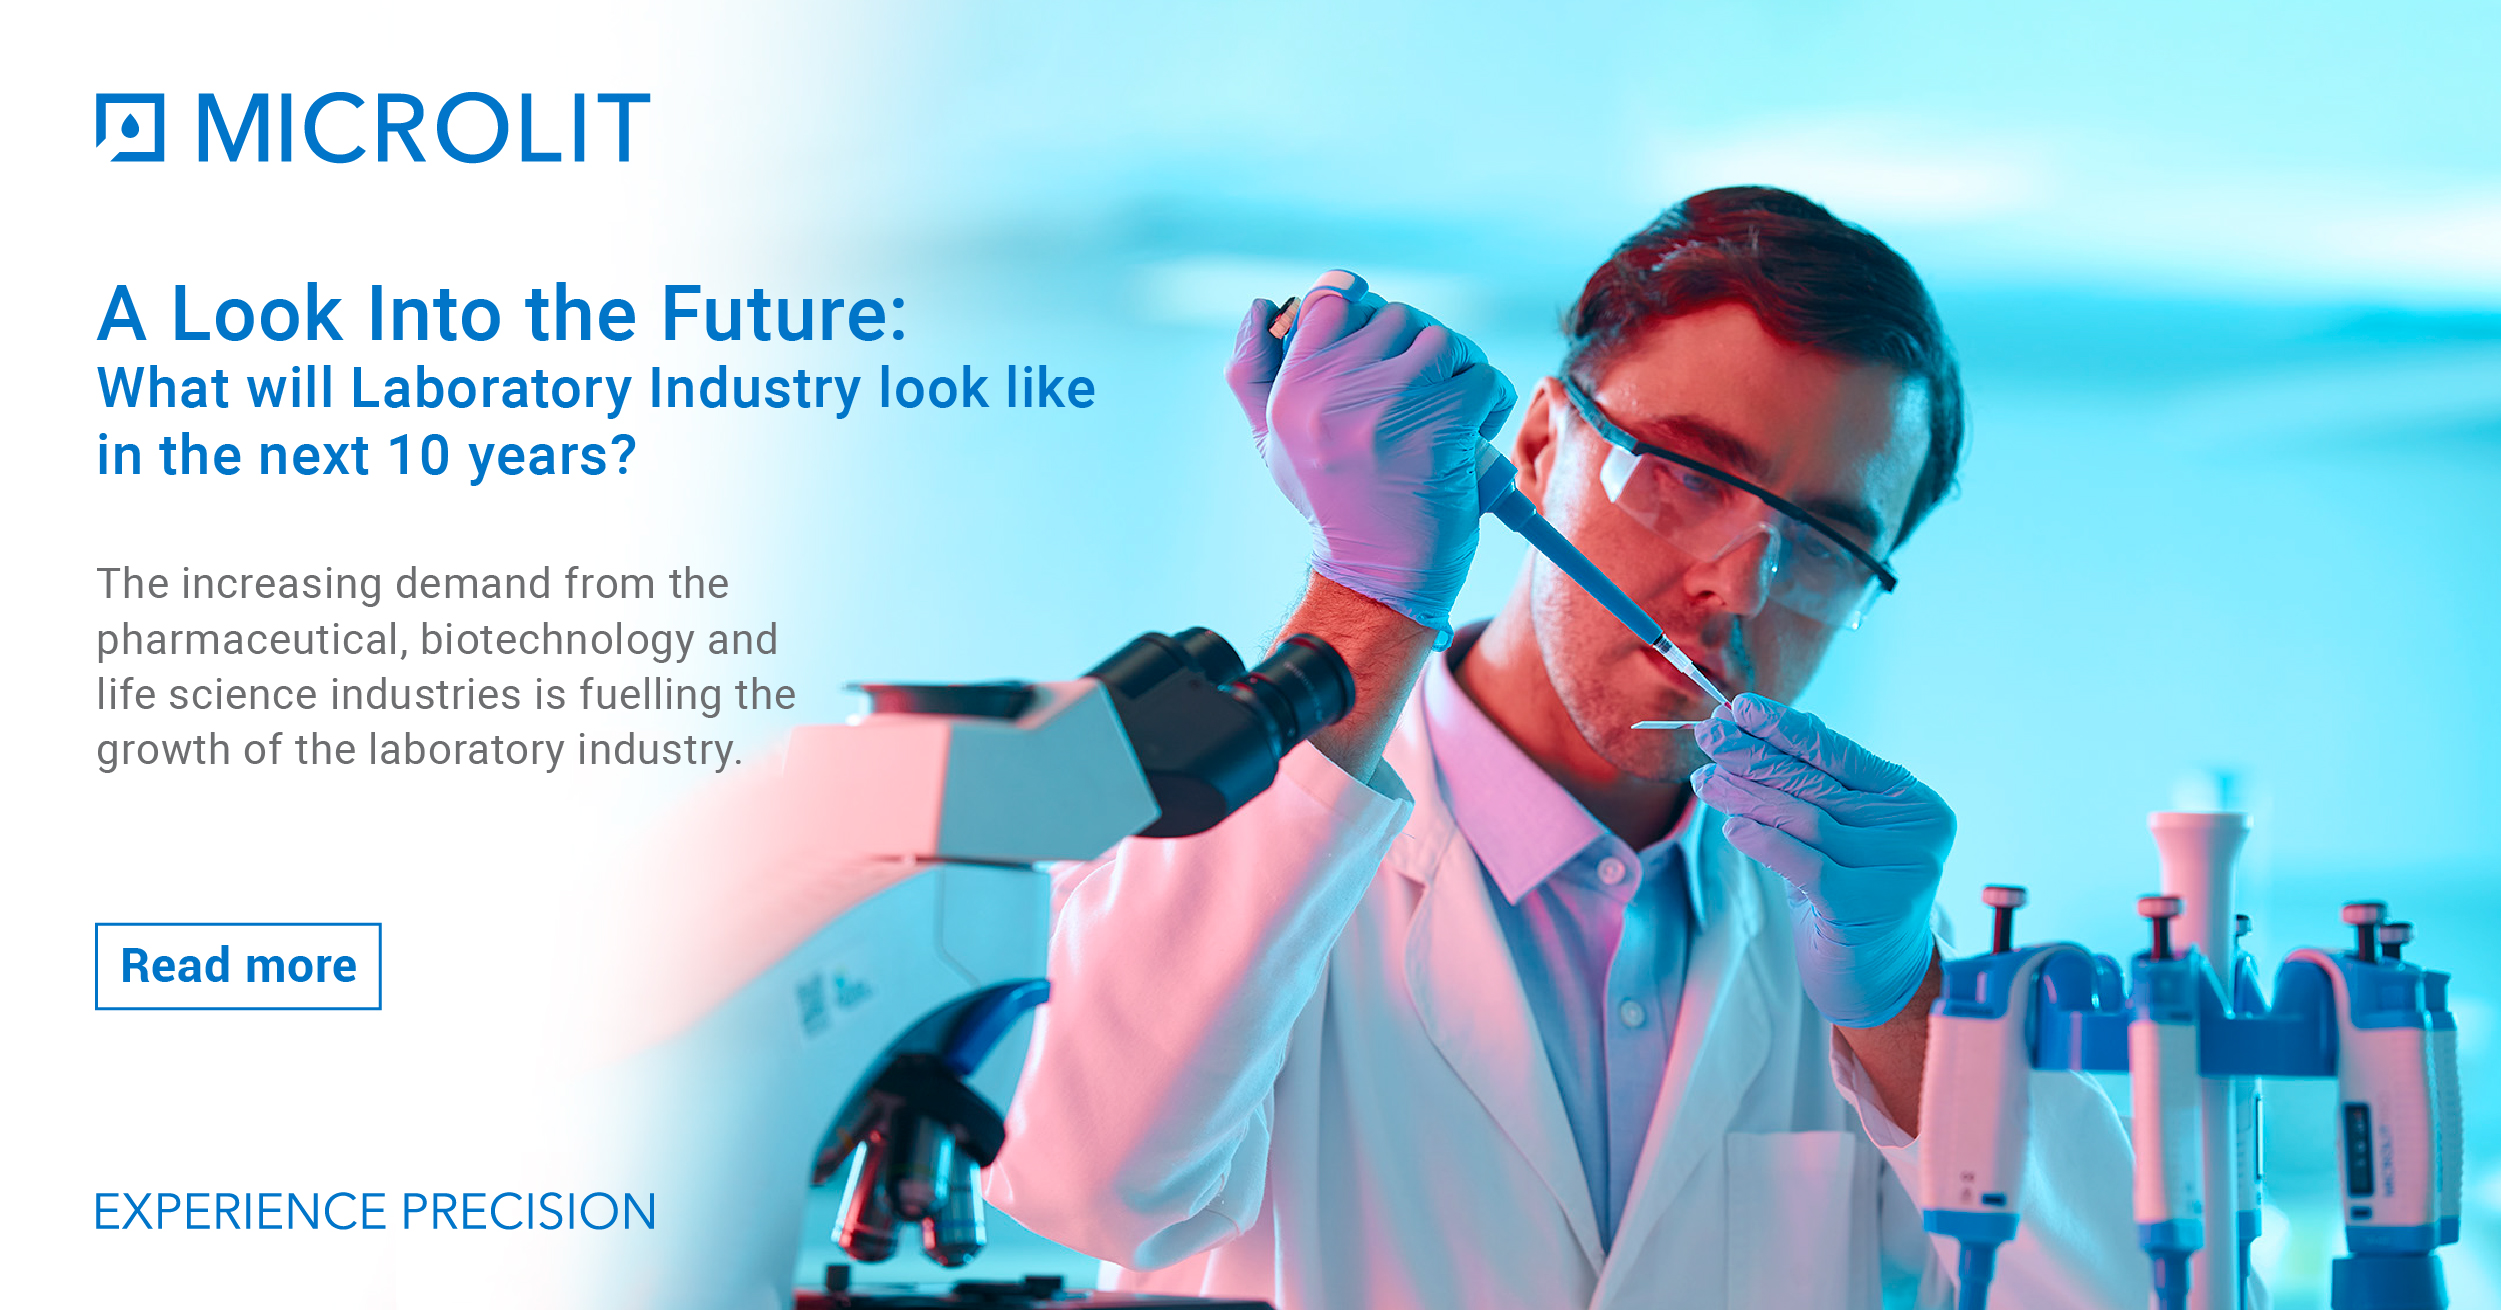 A Look into the Future: What will Laboratory Industry look like in the next 10 years?